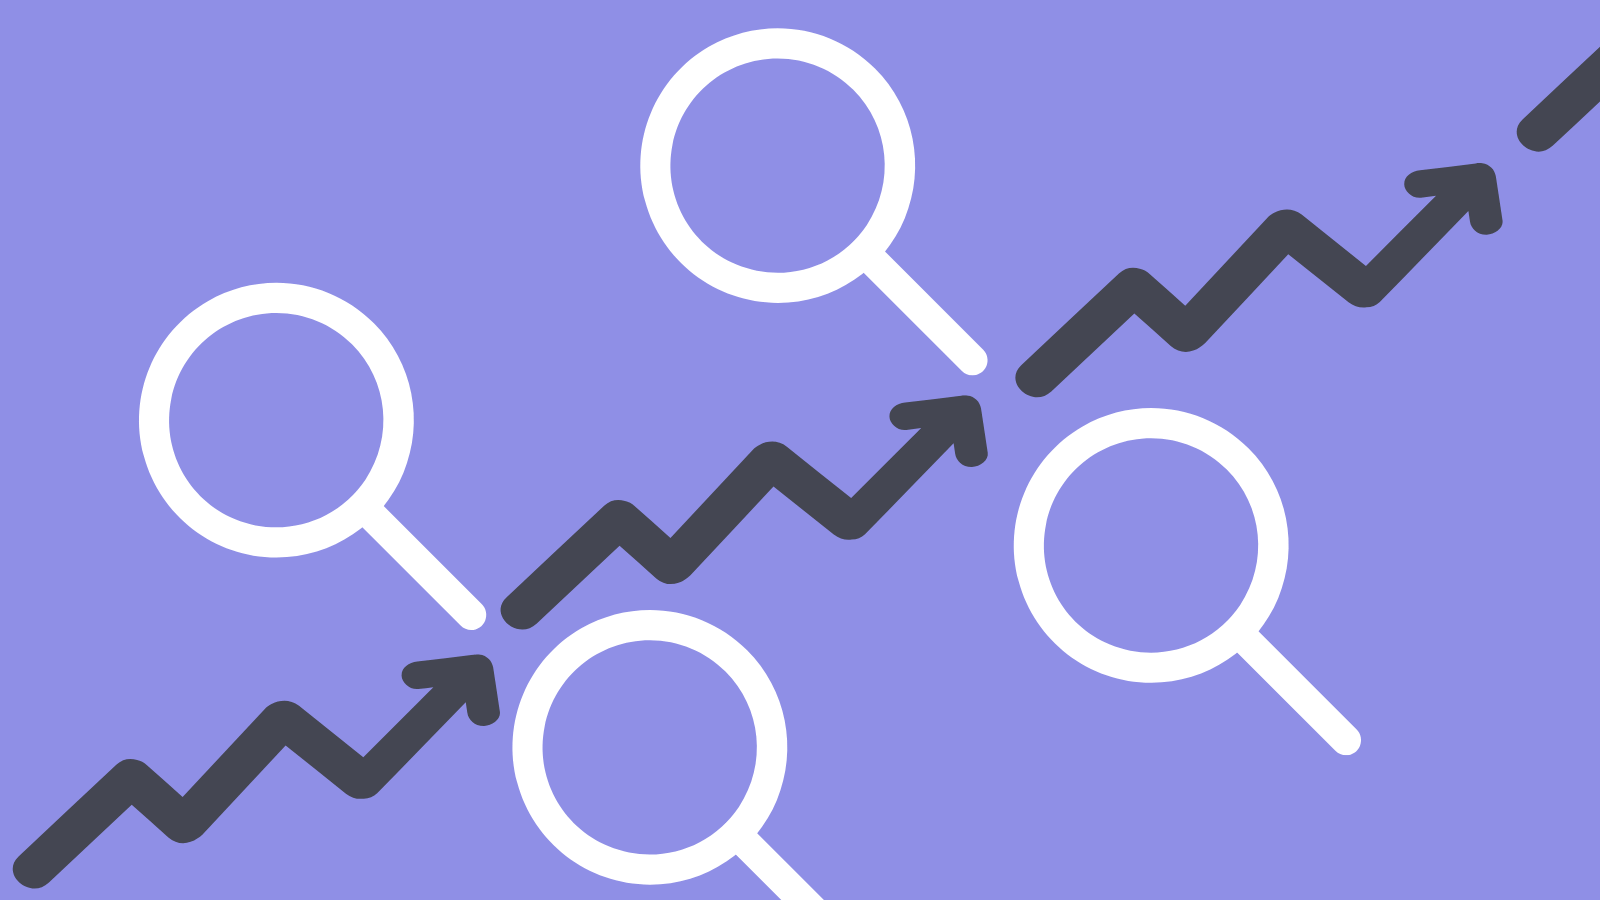 Upward Trending line graph with magnifying glasses 